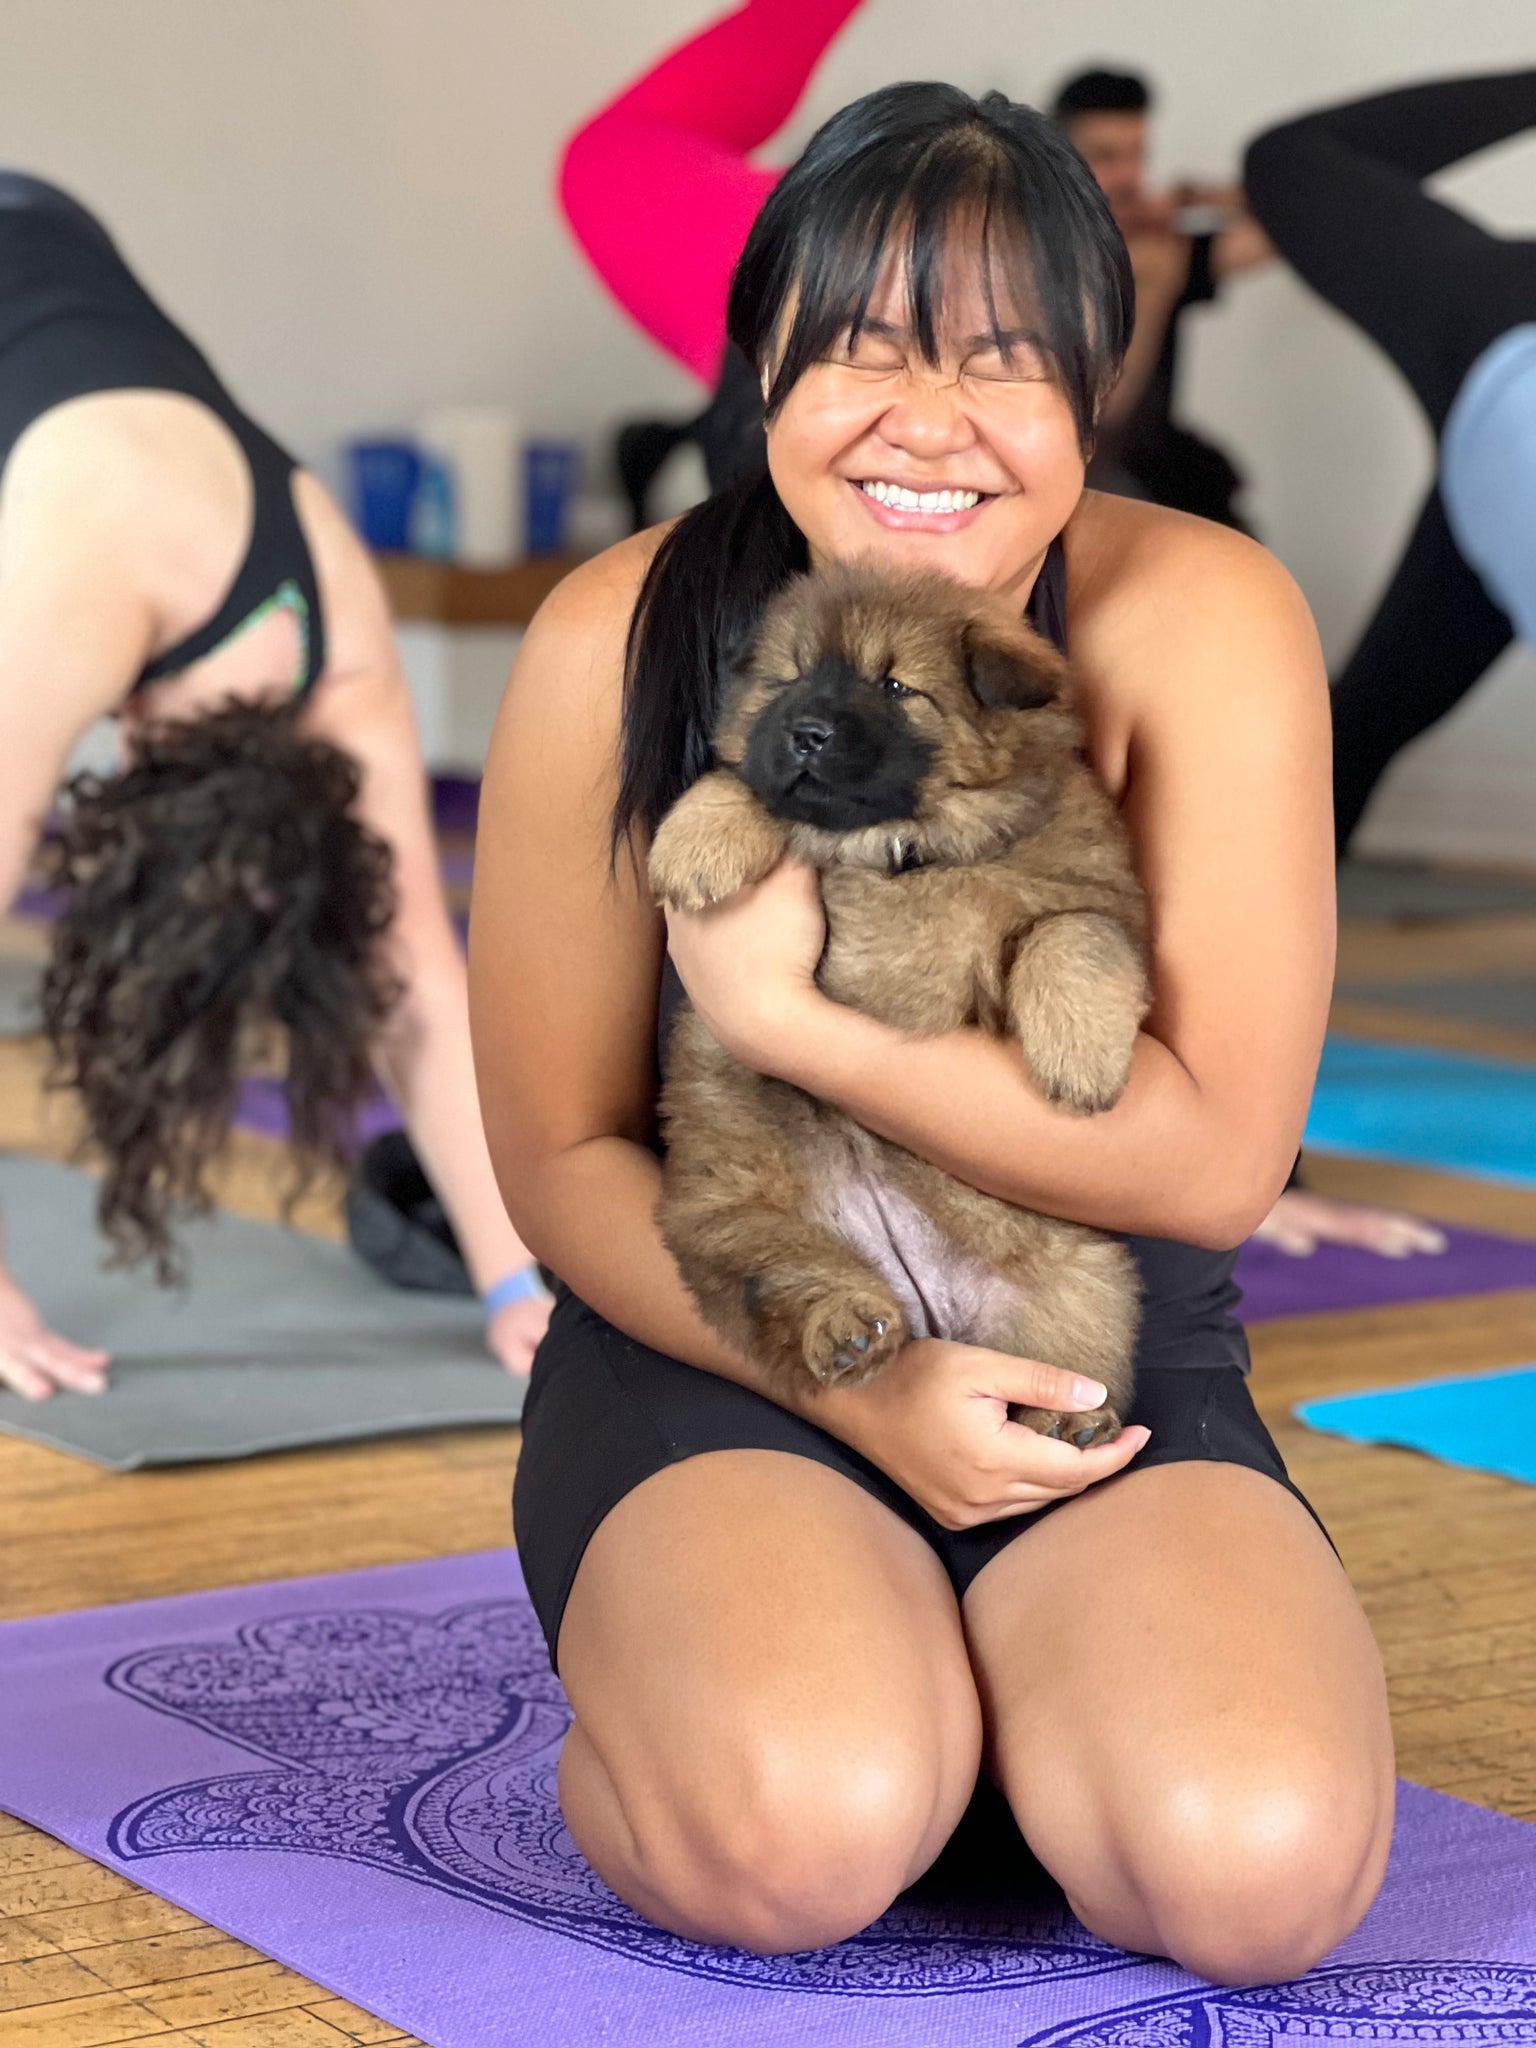 Woman kneeling on purple yoga mat and smiling widely while holding a Chow Chow puppy attending one of Doggos' Puppy Yoga & Bubbly Events